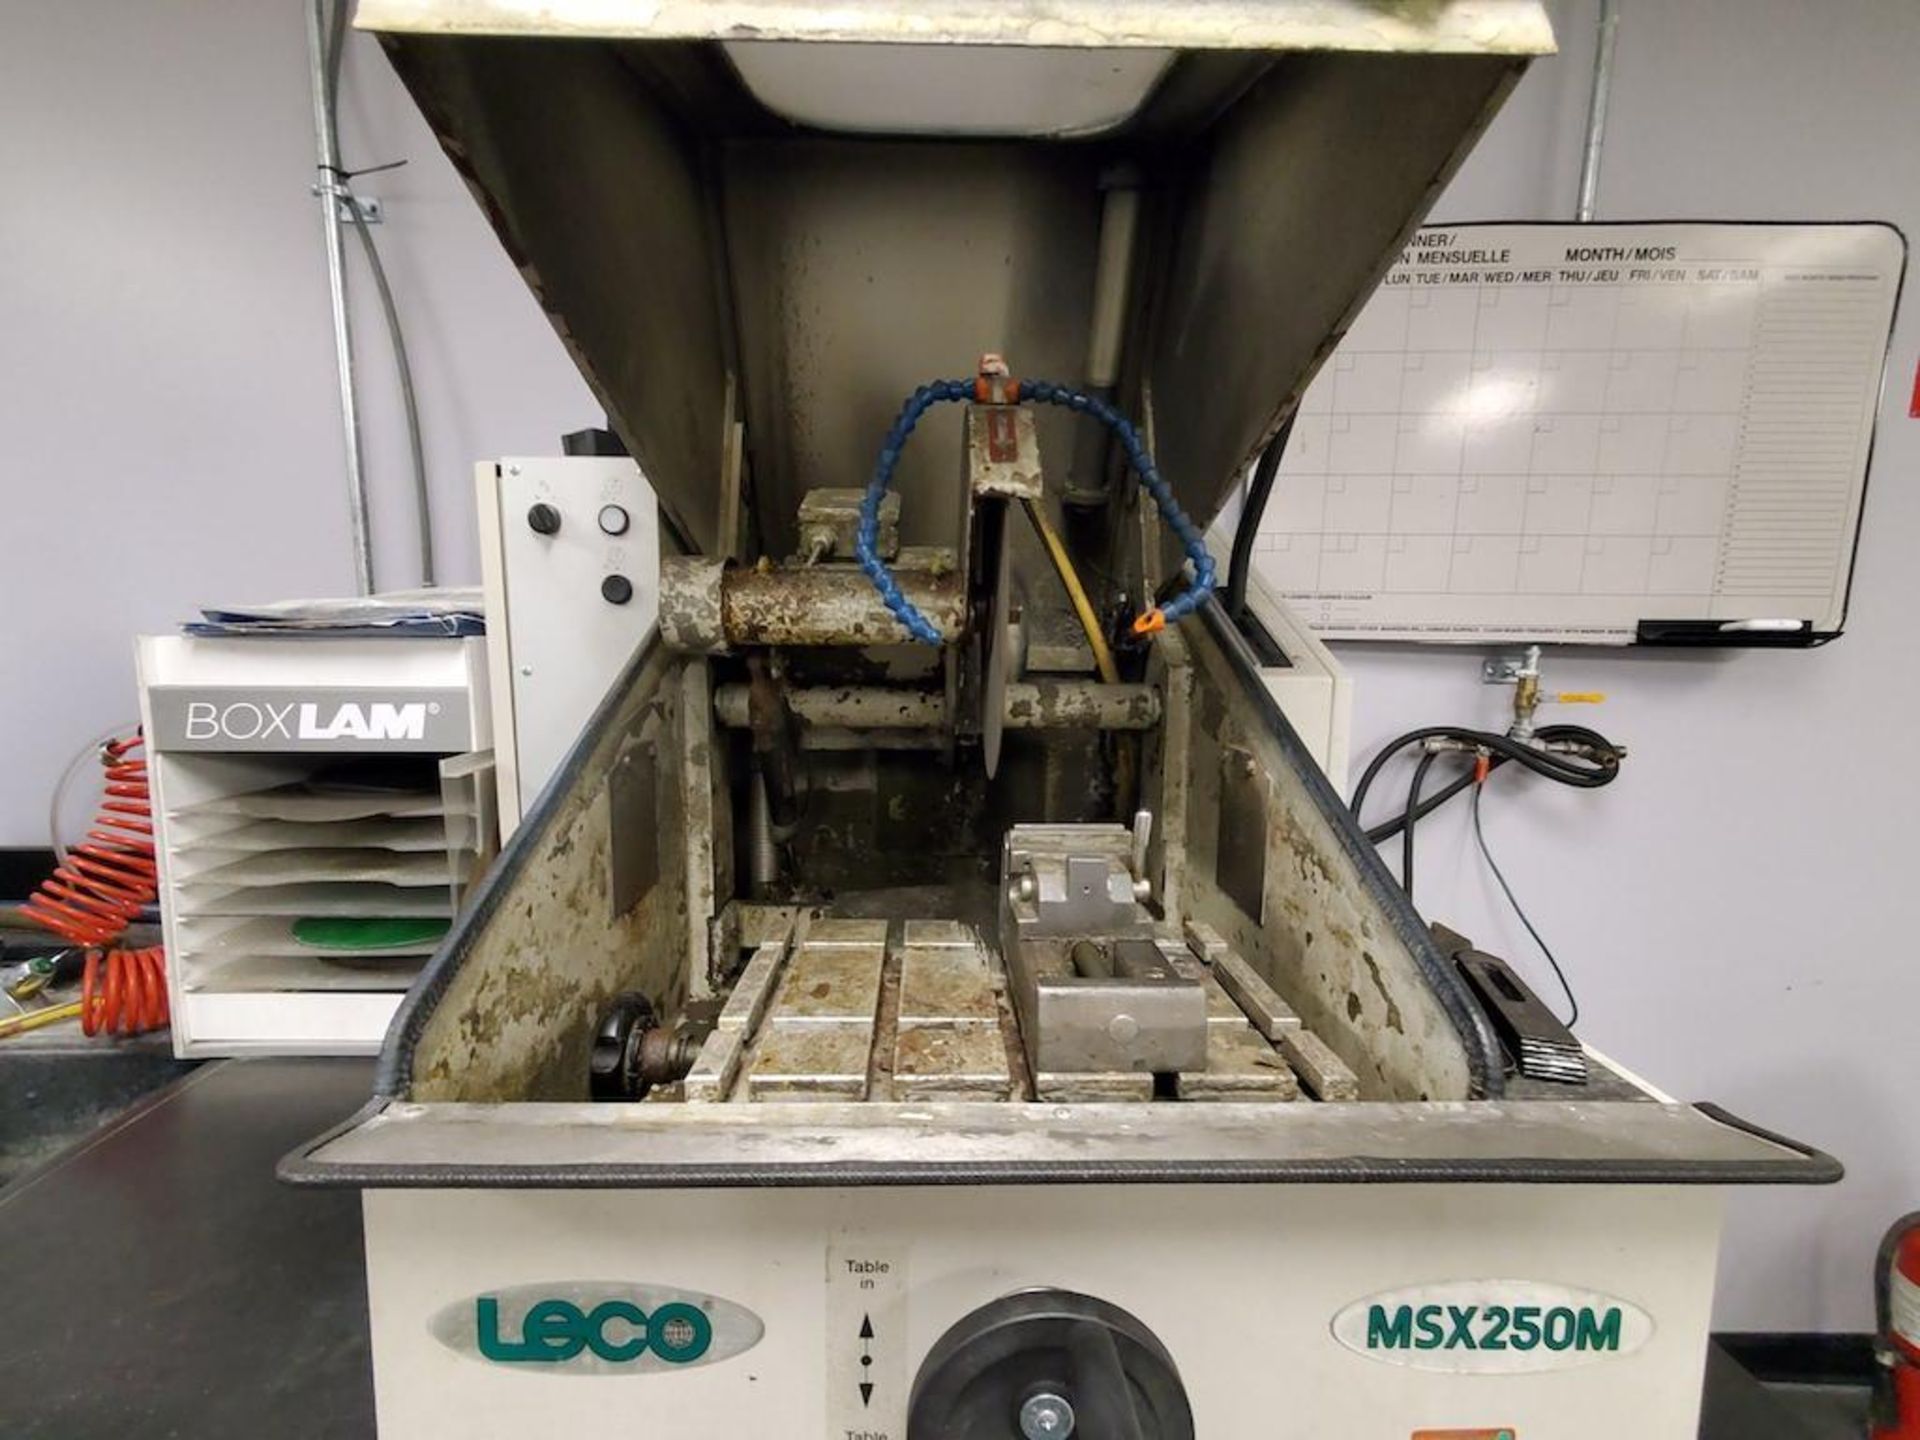 LECO MODEL MSX250M PRECISION GRINDING SAW, 12INCH DISCS [UPSTAIRS LAB] - Image 2 of 3